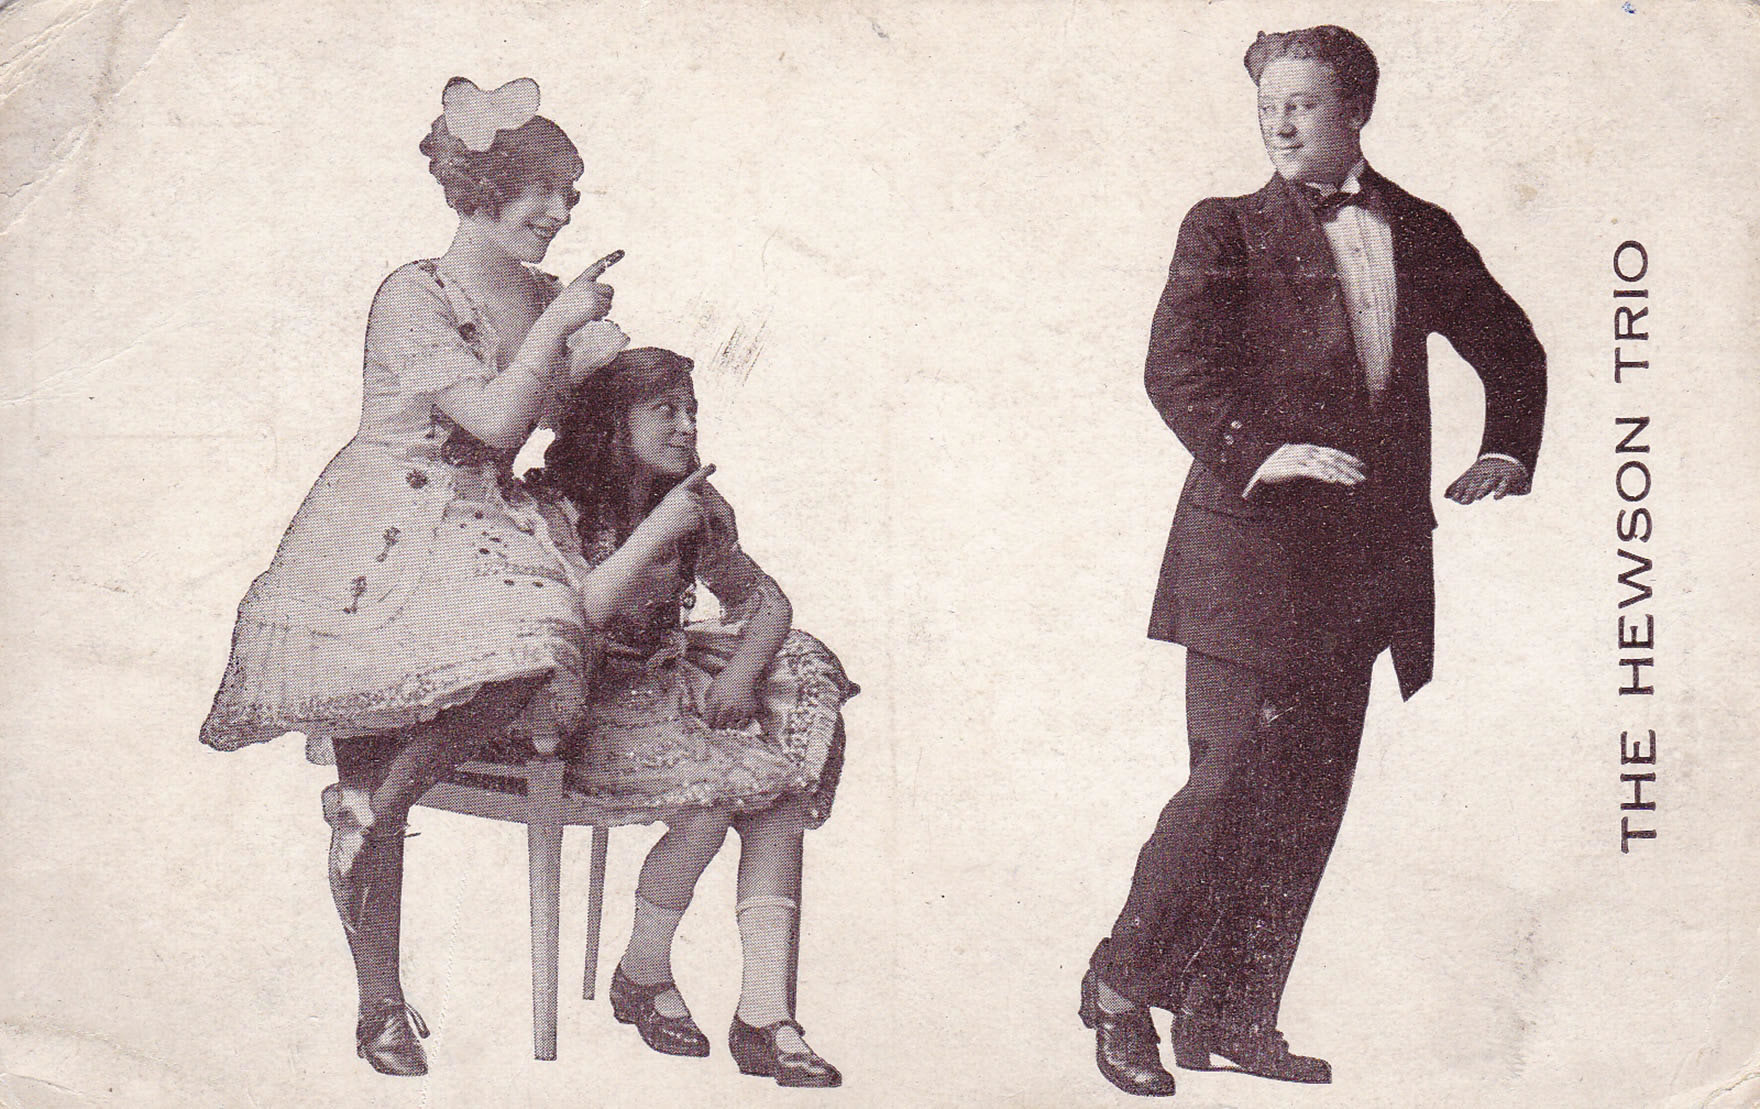 Postcard of The Hewson Trio - A Vaudeville theatre act made up of (L-R) Dolly (Sharon Osbourne's grandmother), Ira (Dolly's sister, sitting down) and Arthur James Shaw (Dolly's husband and Sharon Osbourne's grandfather). Image Credit: BBC/Wall to Wall Media Ltd/Gina Maszlin.